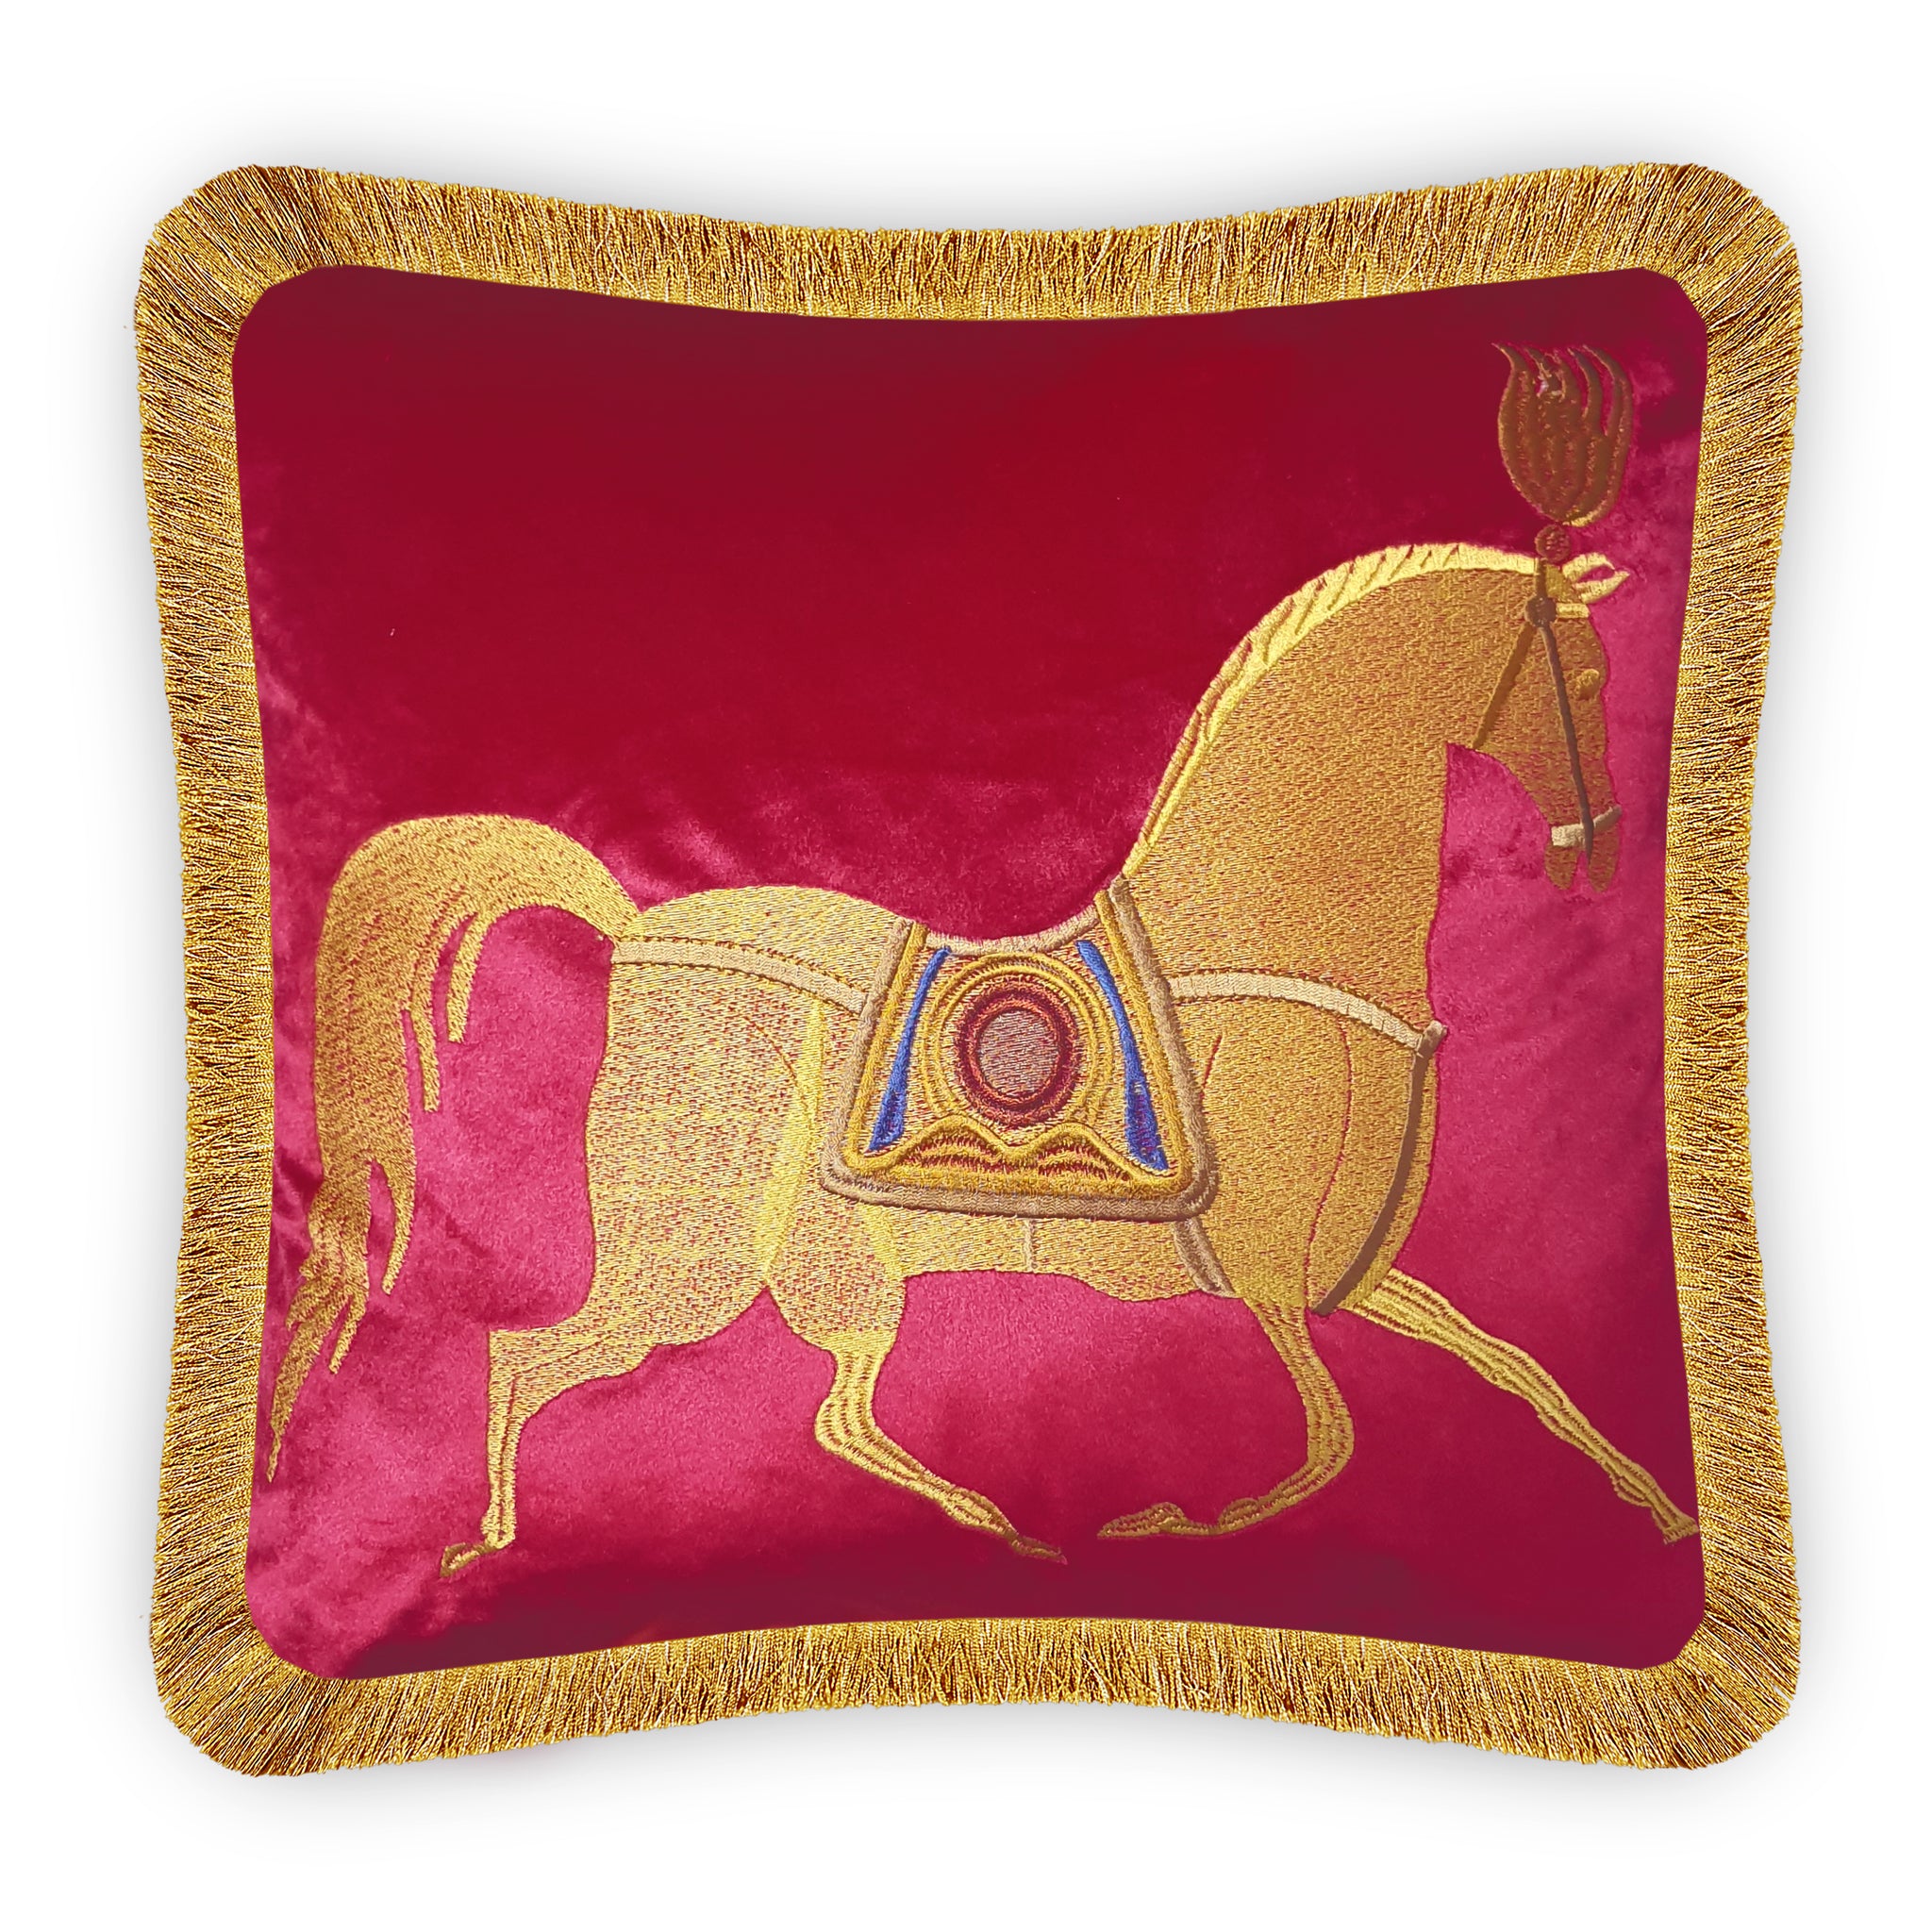 Velvet Horse Embroidered Cushion Cover, Baroque Style Decorative Pillowcase, Classic Home Decor Throw Pillow with Fringe for Bedroom, Living Room, 18x18 Inch, 45x45 cm